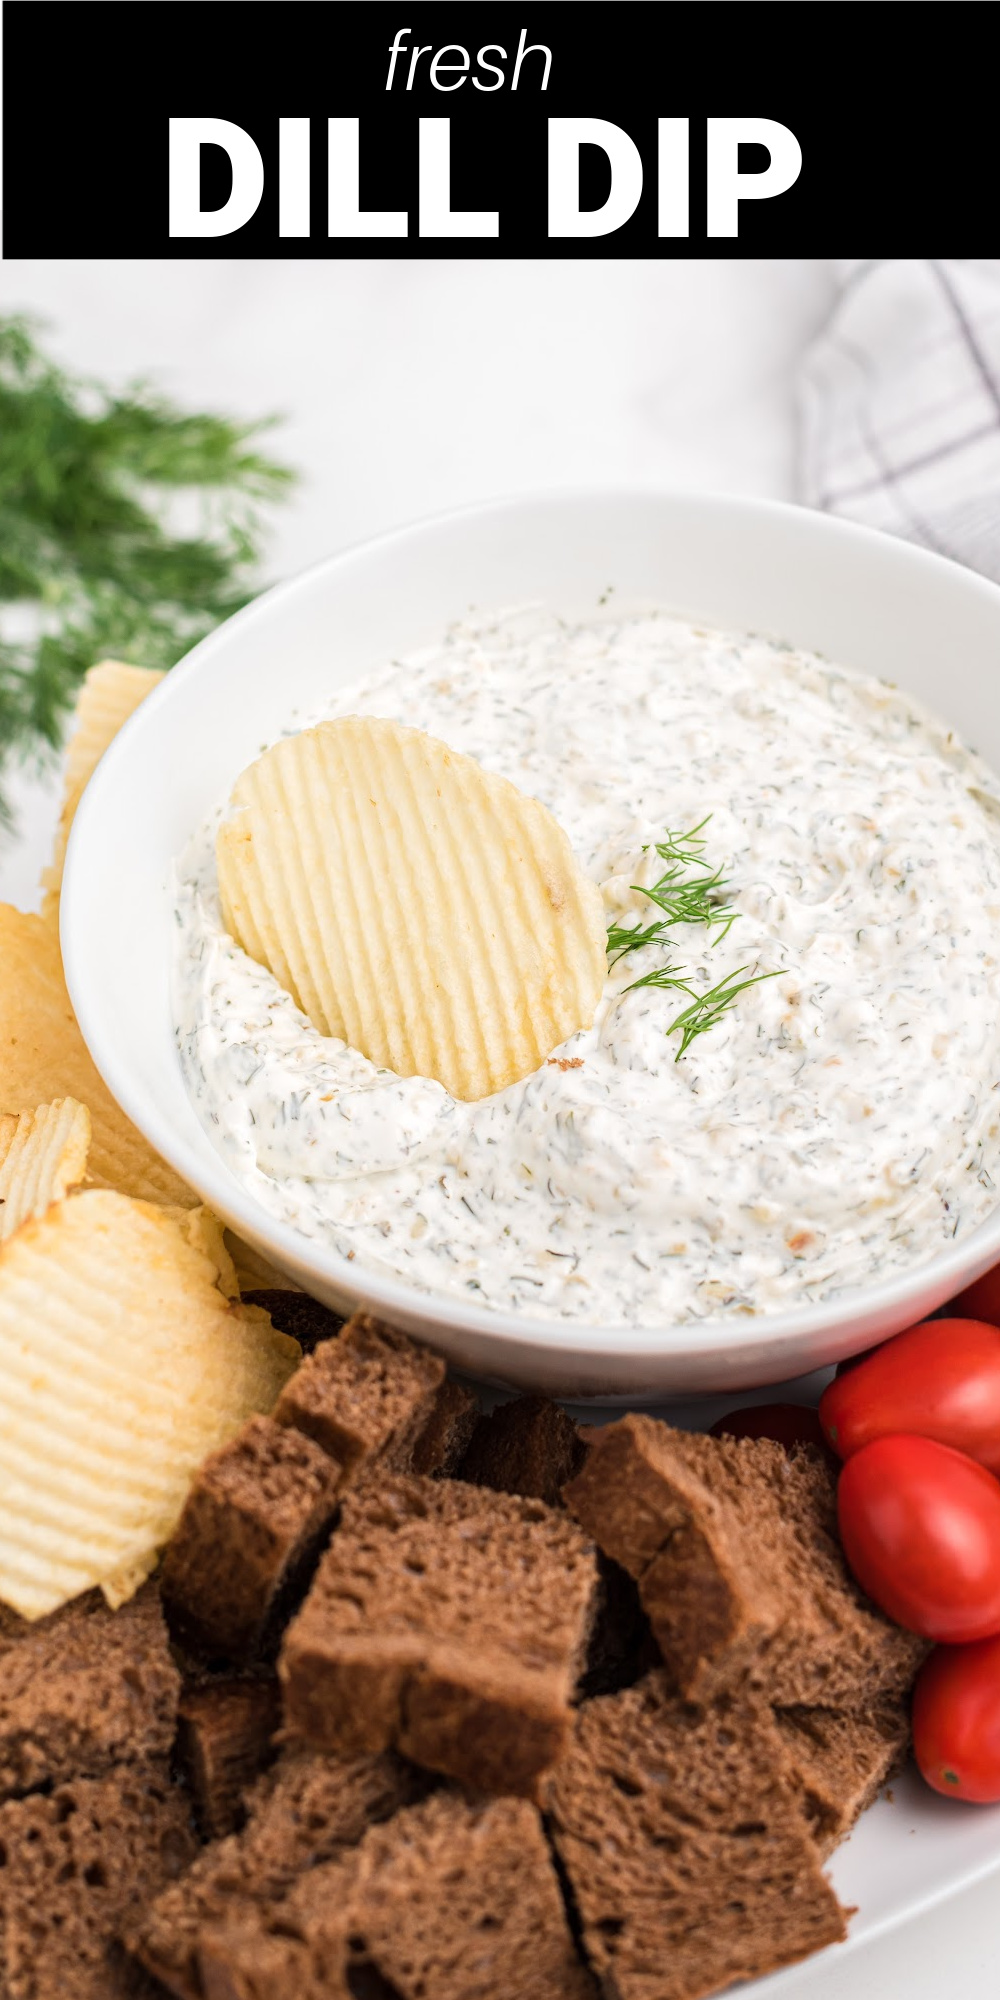 This simple yet delicious homemade Dill Dip Recipe is so easy to make and is SO much better than any packaged mix you can buy at the store. It's such a flavorful dip, you’ll want to serve it with everything from potato chips, pita chips, to fresh veggies. 